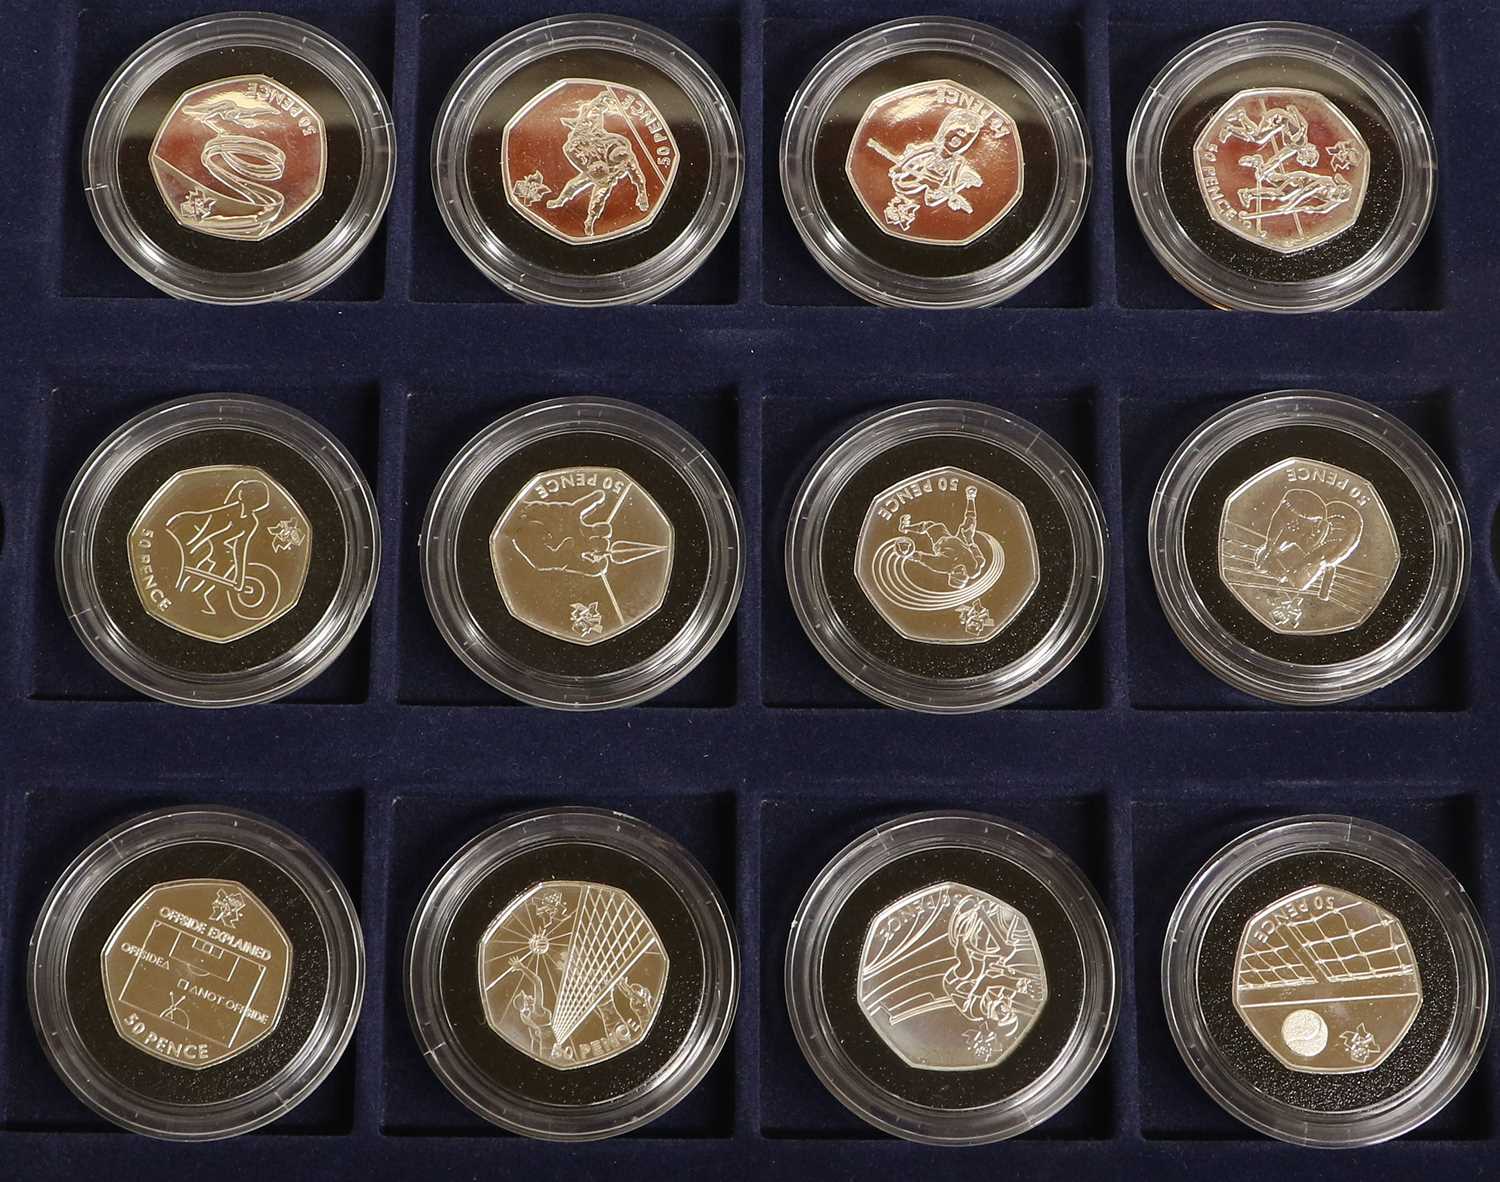 London 2012 Sports Collection, the complete set of 29 x sterling silver 50p coins, issued to - Image 4 of 6